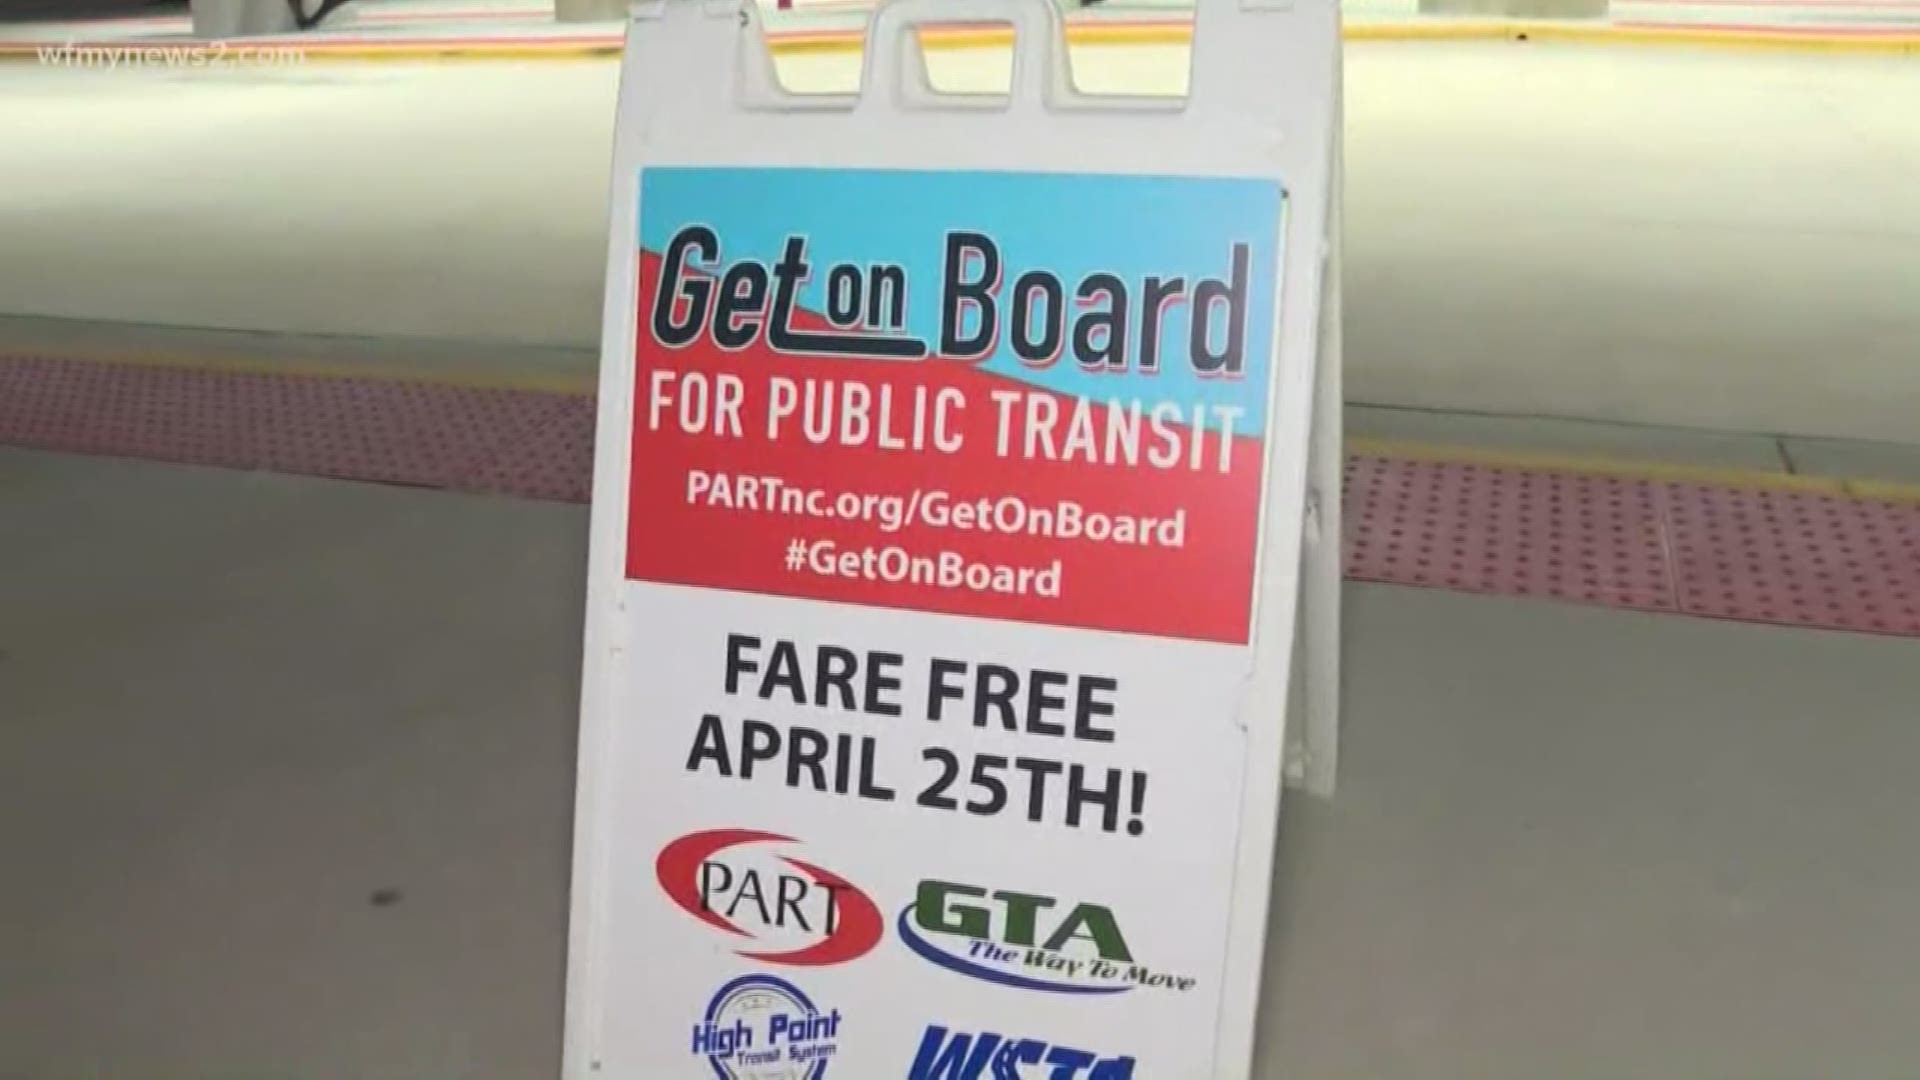 More than 200 public transit agencies and organizations nationwide will celebrate Get On Board Day.